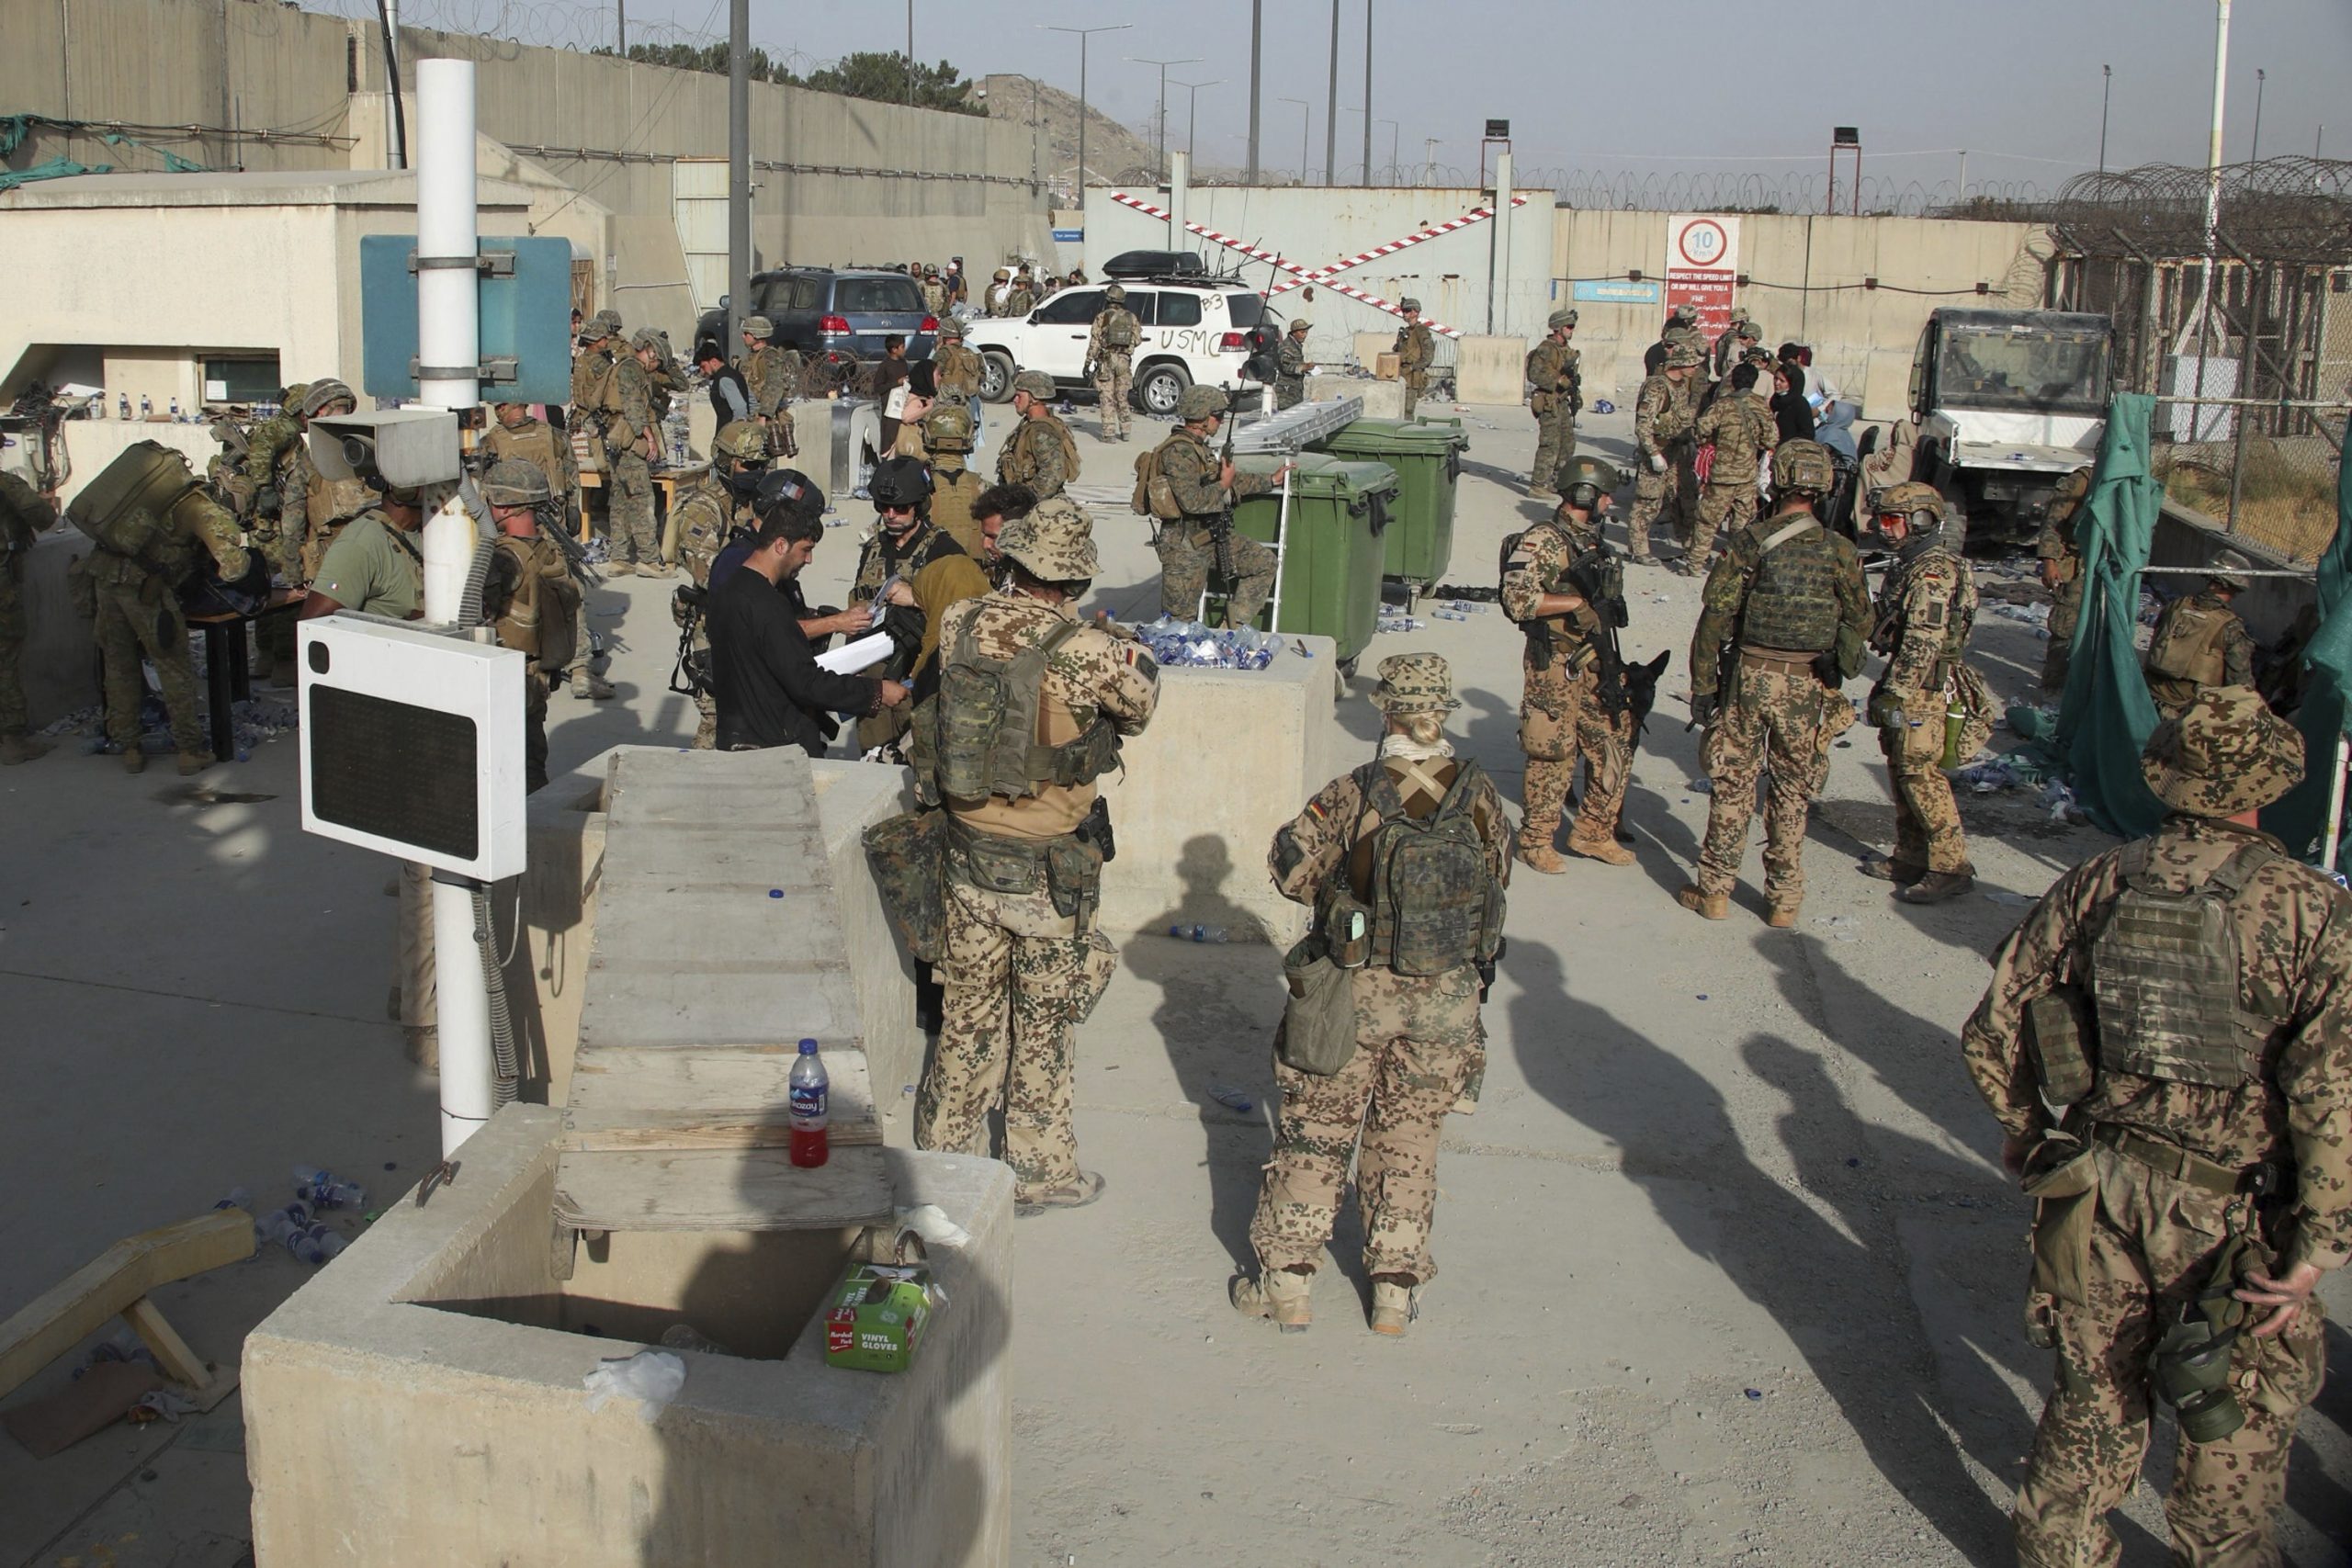 7 Afghans killed in Kabul airport chaos, says British Defence Ministry